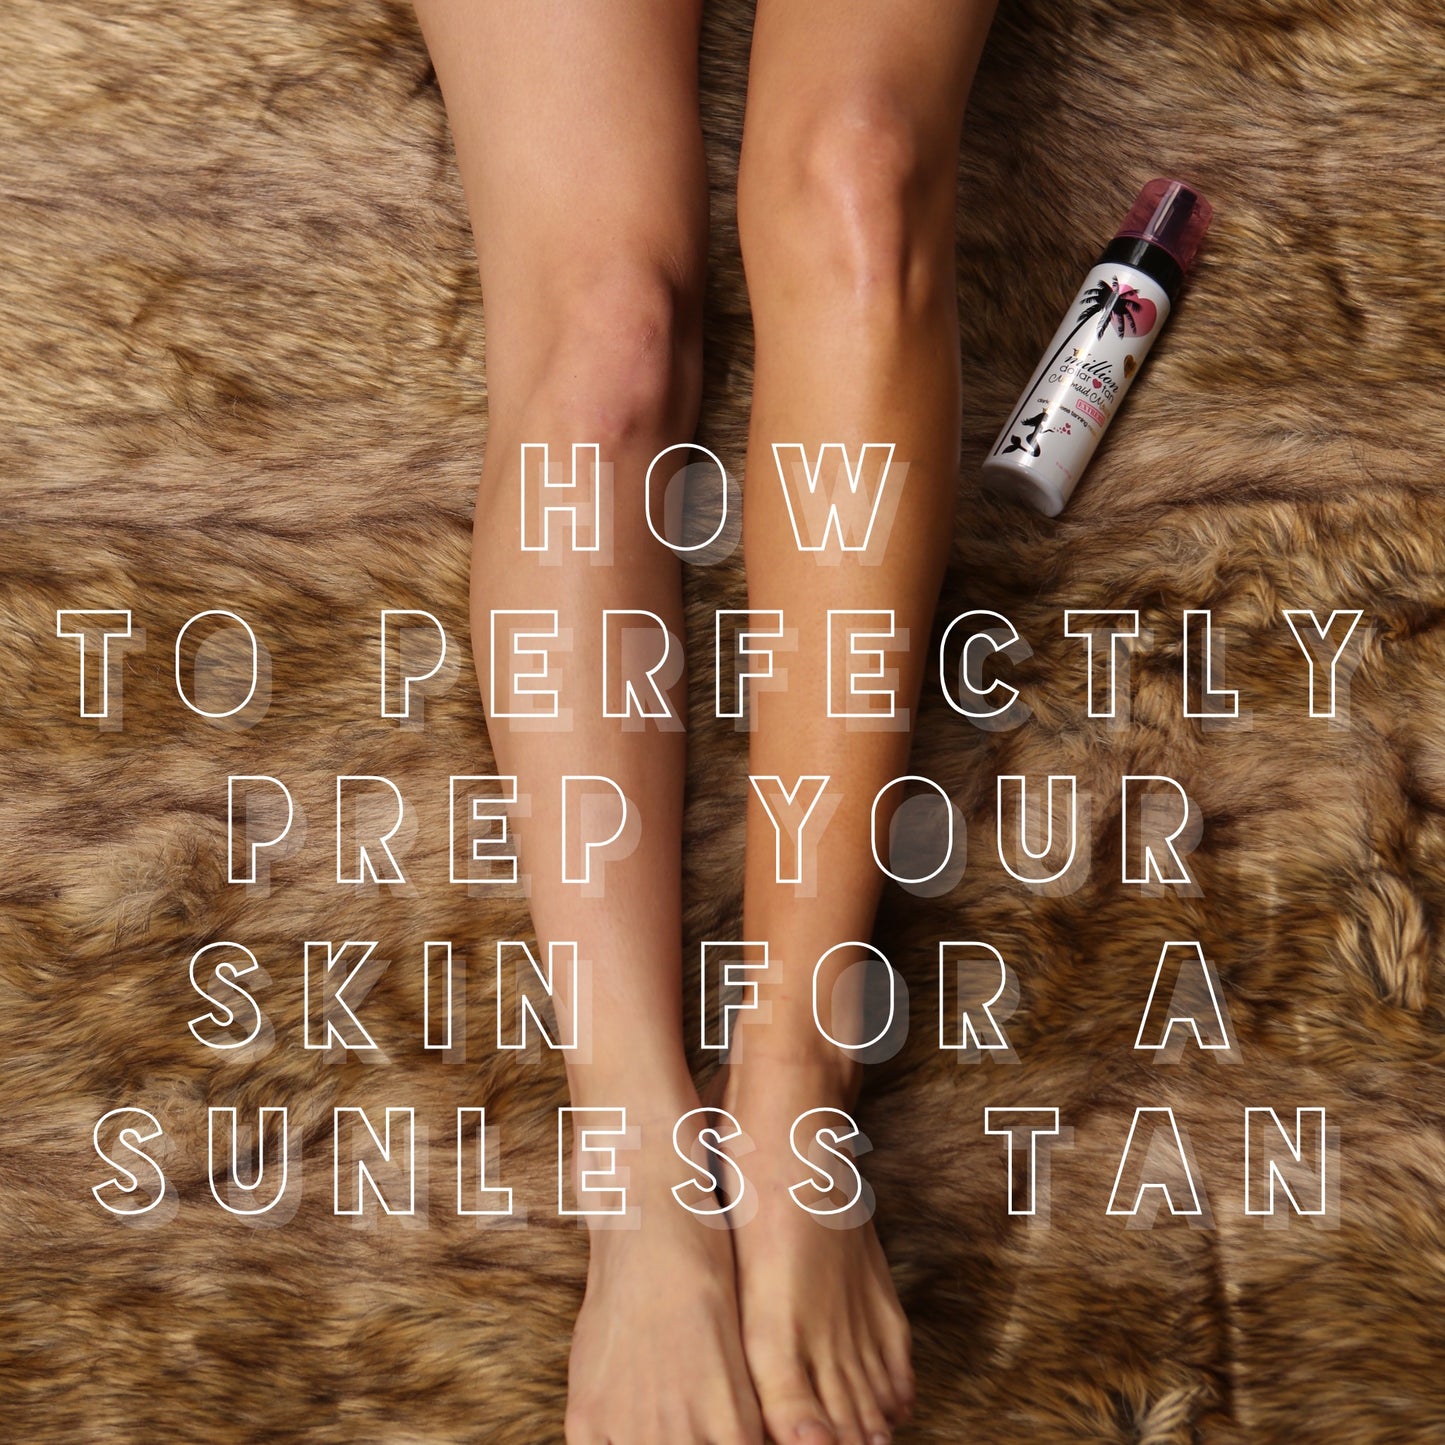 Episode 9 How To Perfectly Prep Your Skin For A Sunless Tan